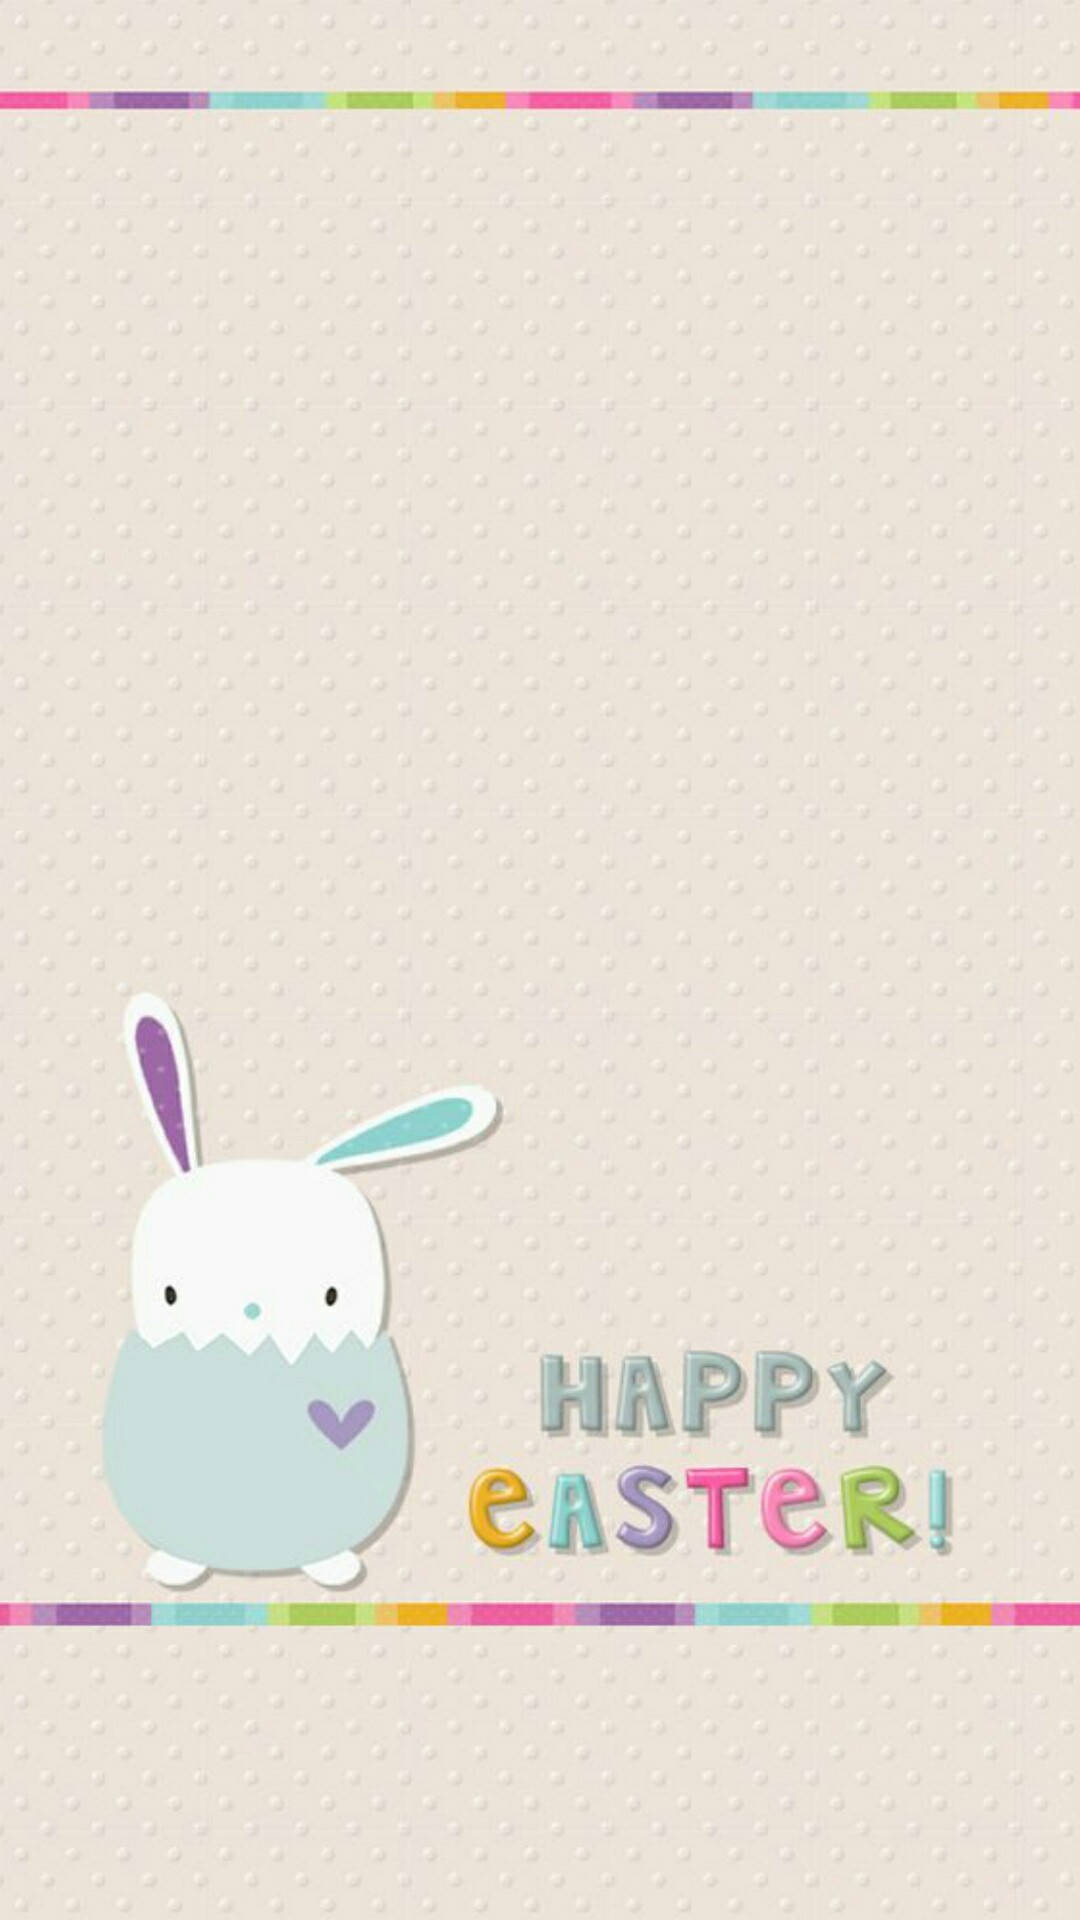 Get In The Holiday Spirit With This Easter-themed Iphone Background